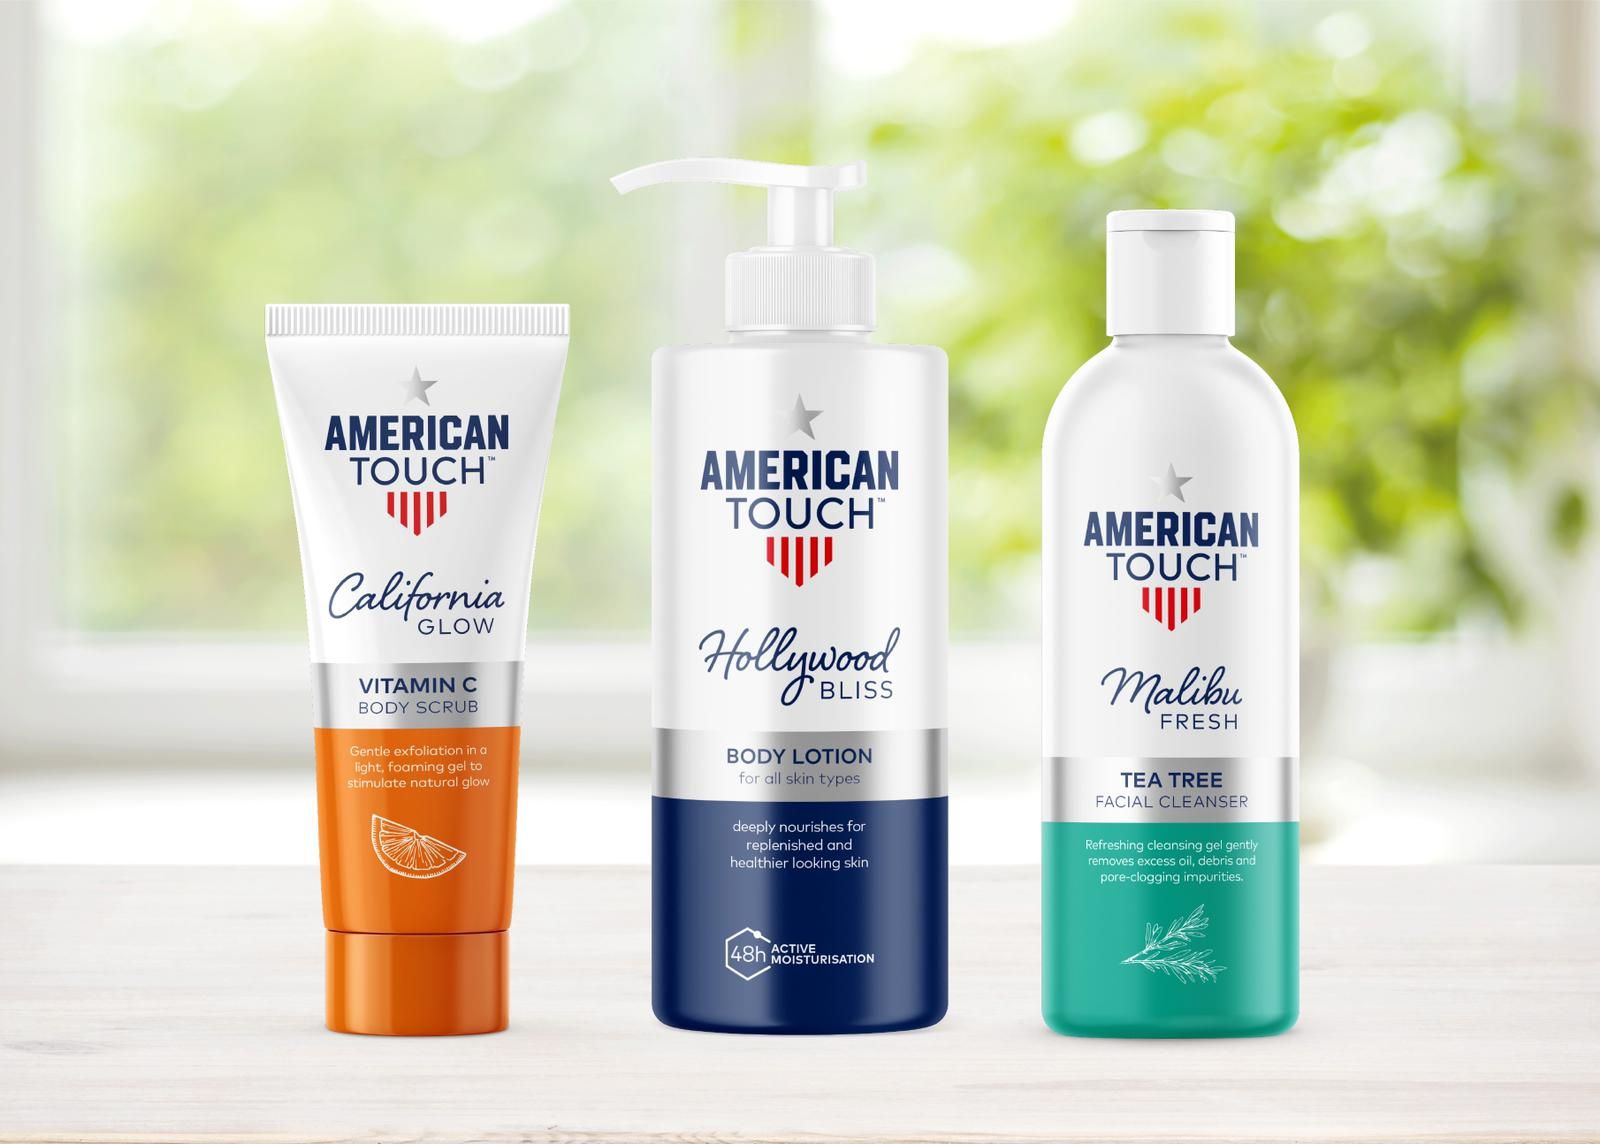 AMERICAN TOUCH BODY LOTION